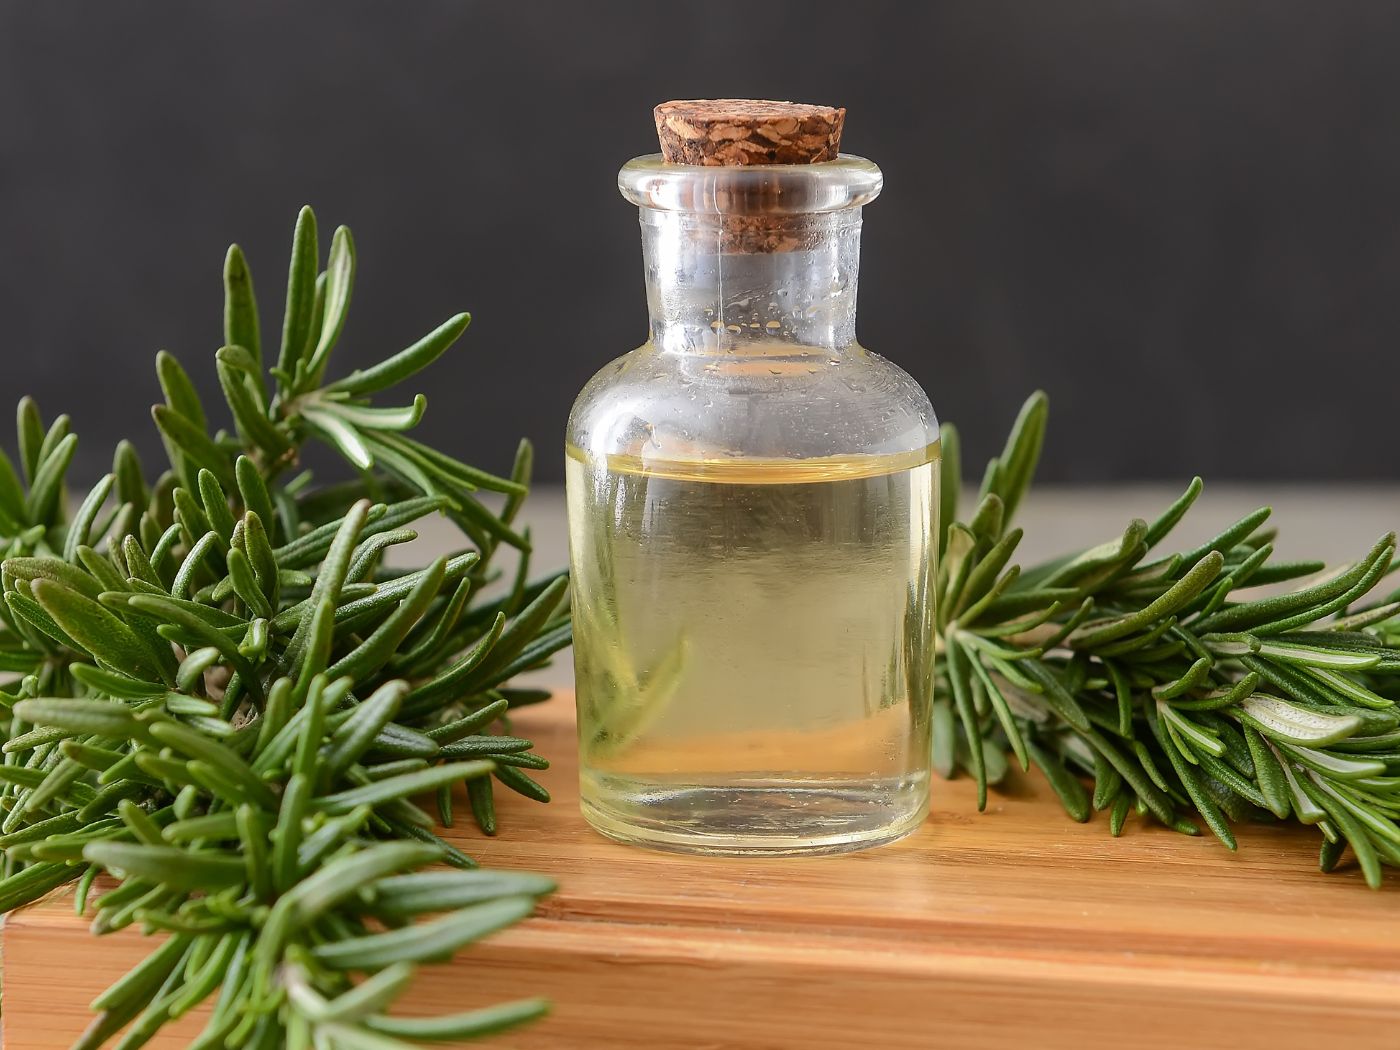 Best Use Of Rosemary Oil For Hair – Its Benefits, Working & Usage